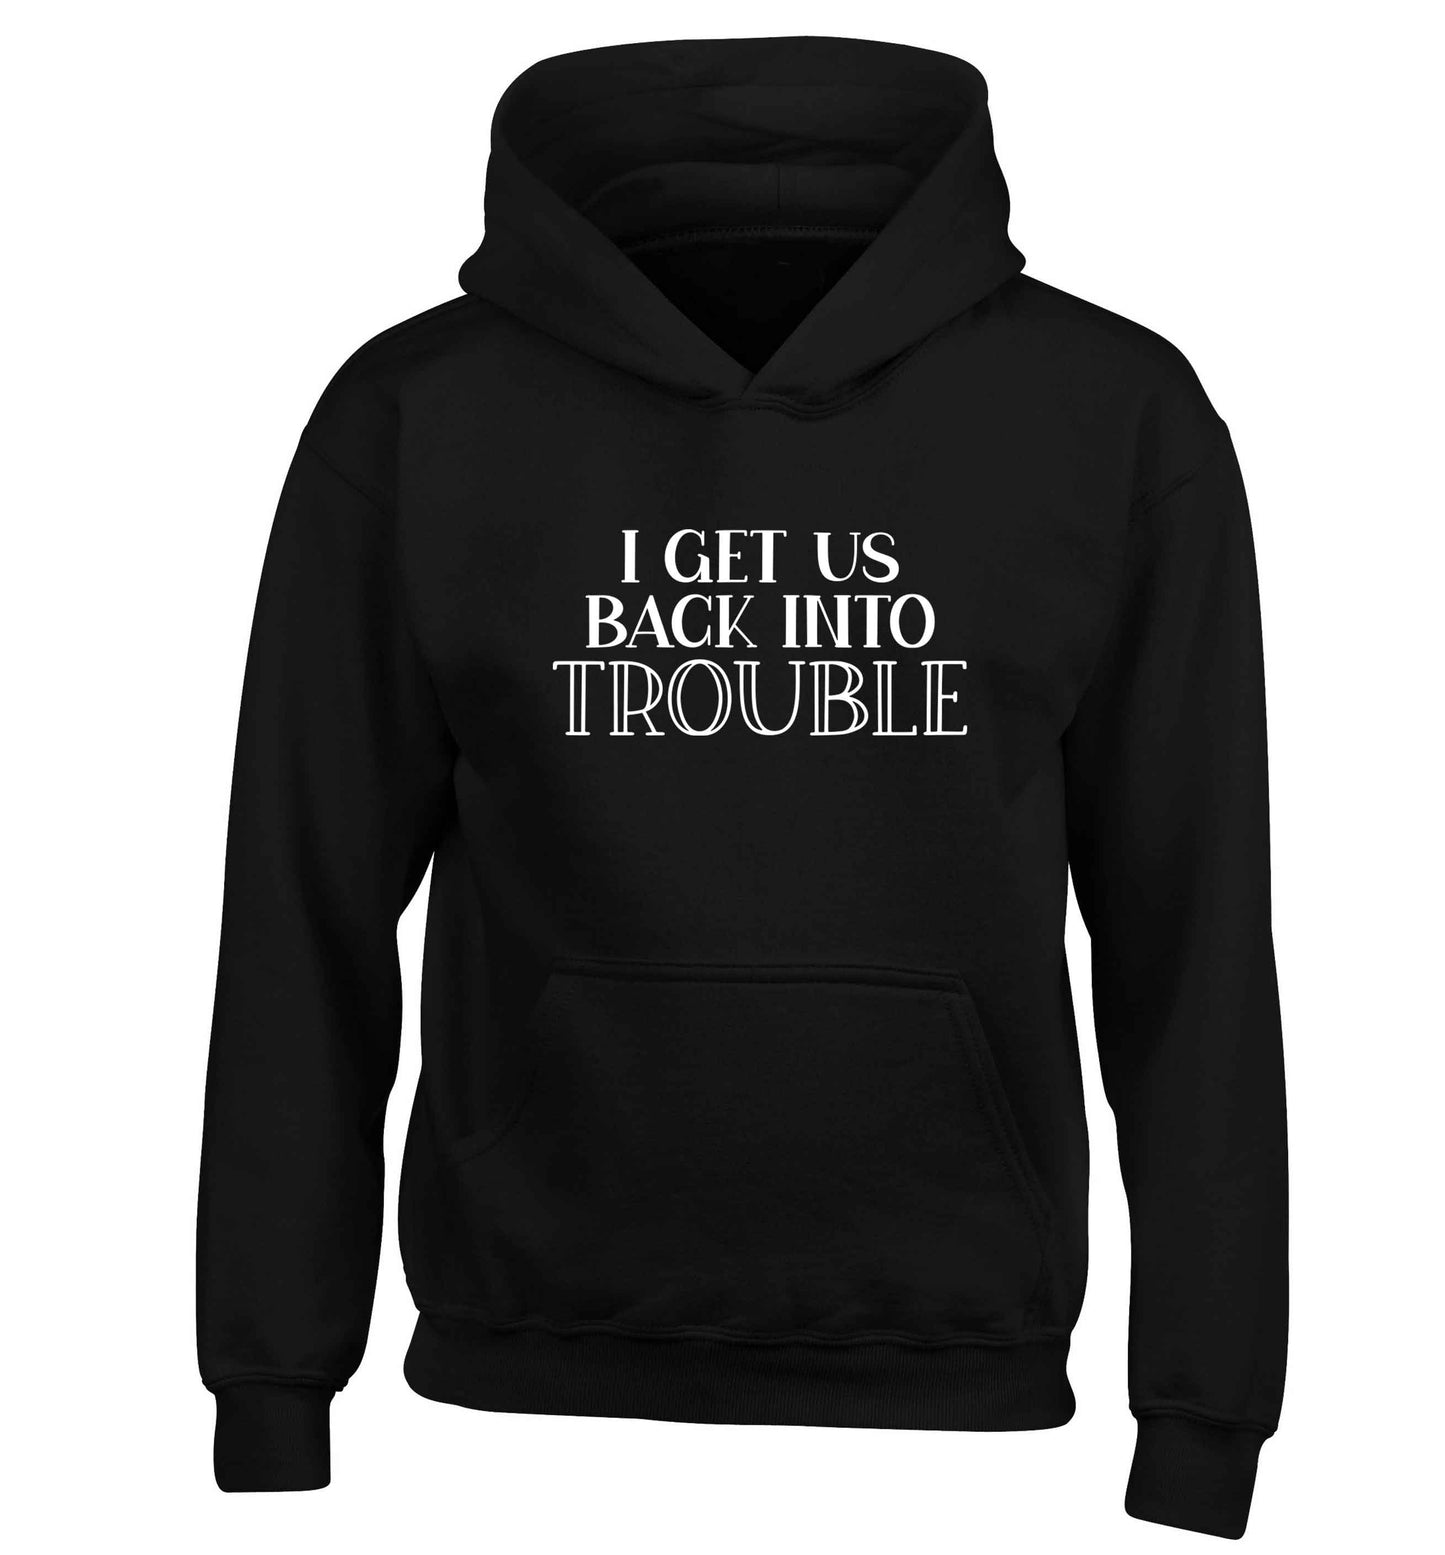 I get us back into trouble children's black hoodie 12-13 Years